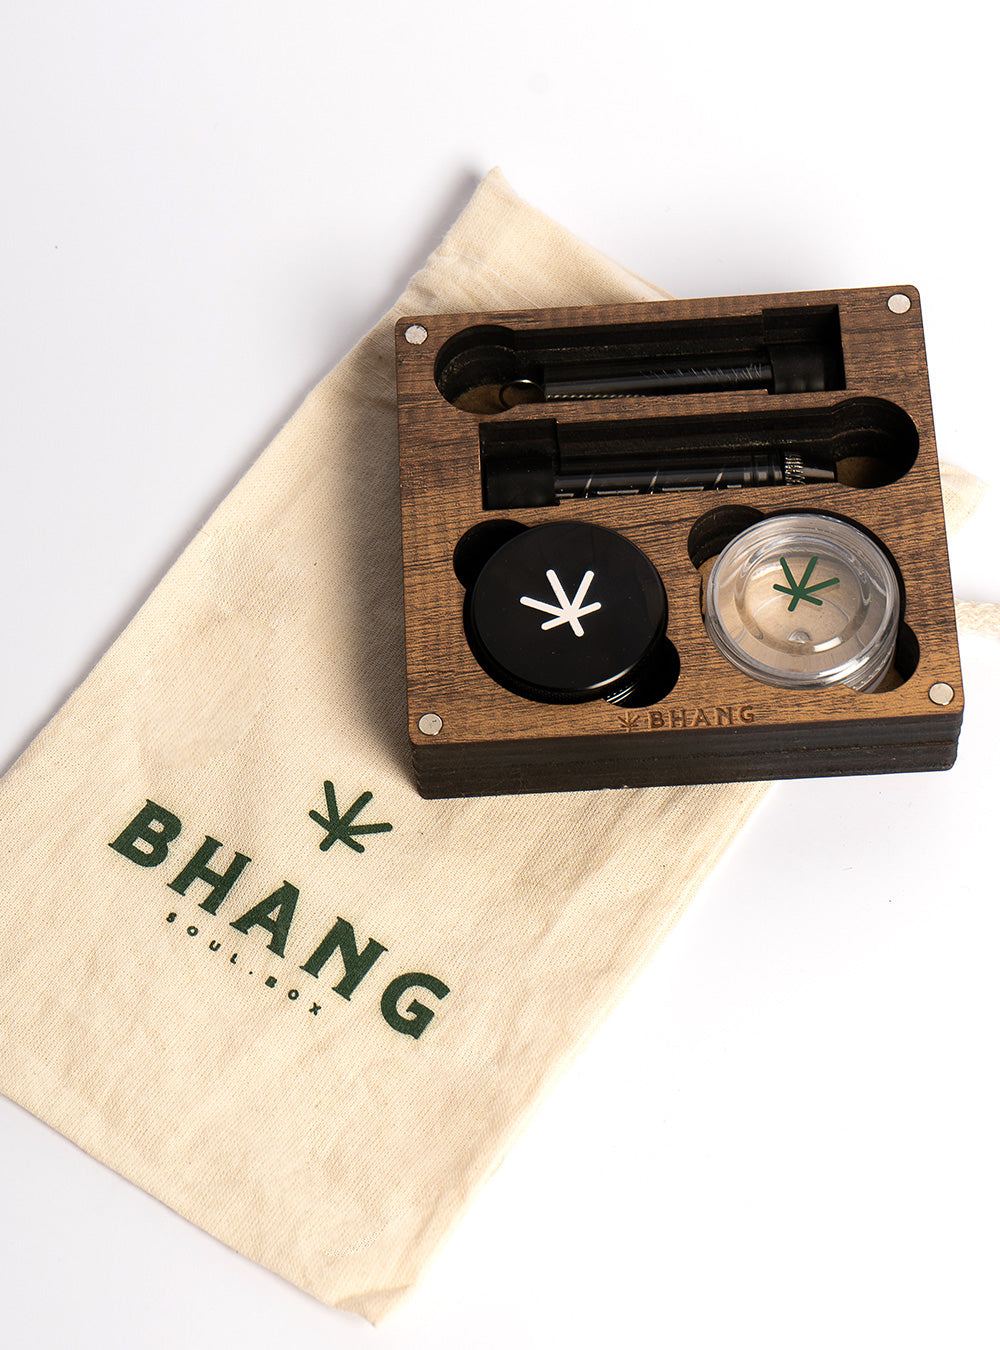 GLASS BHANG